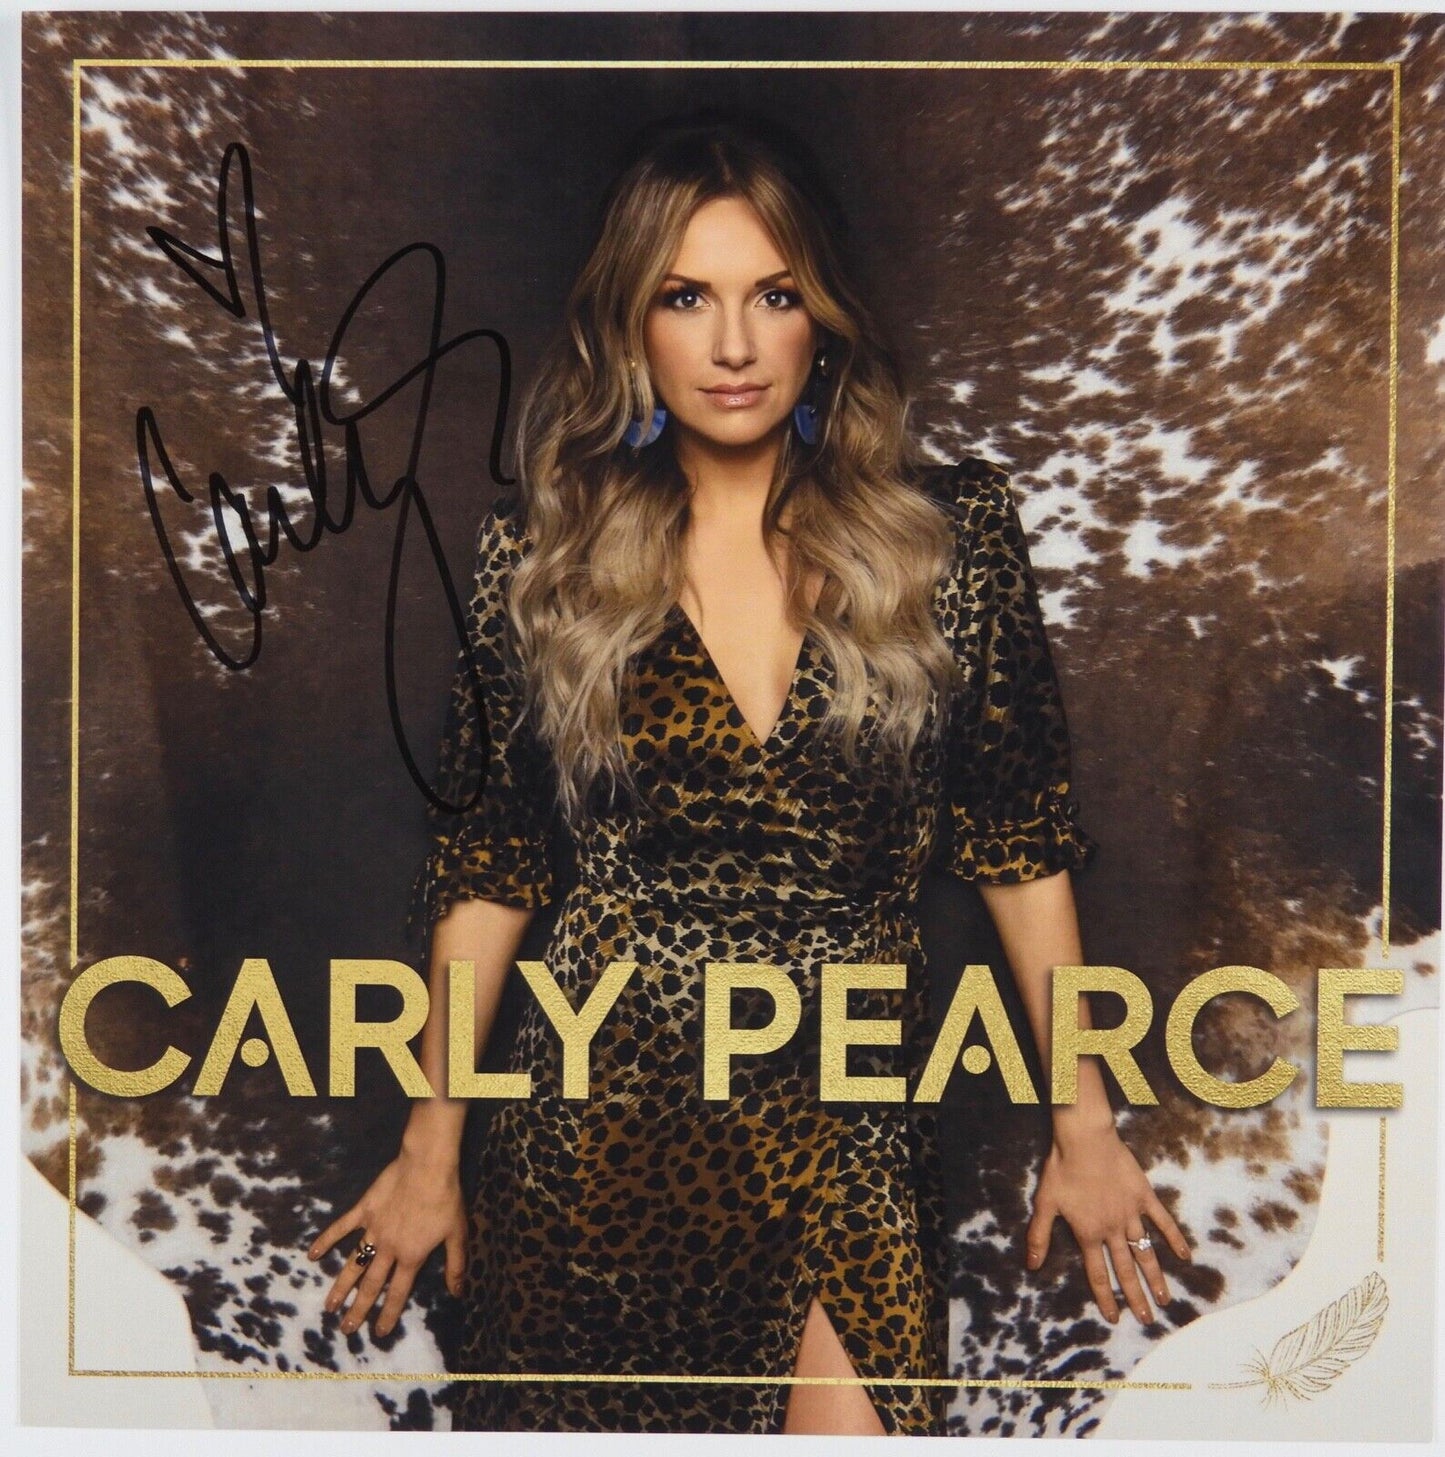 Carly Pearce JSA Signed Autograph Album Flat includes The Album and Record